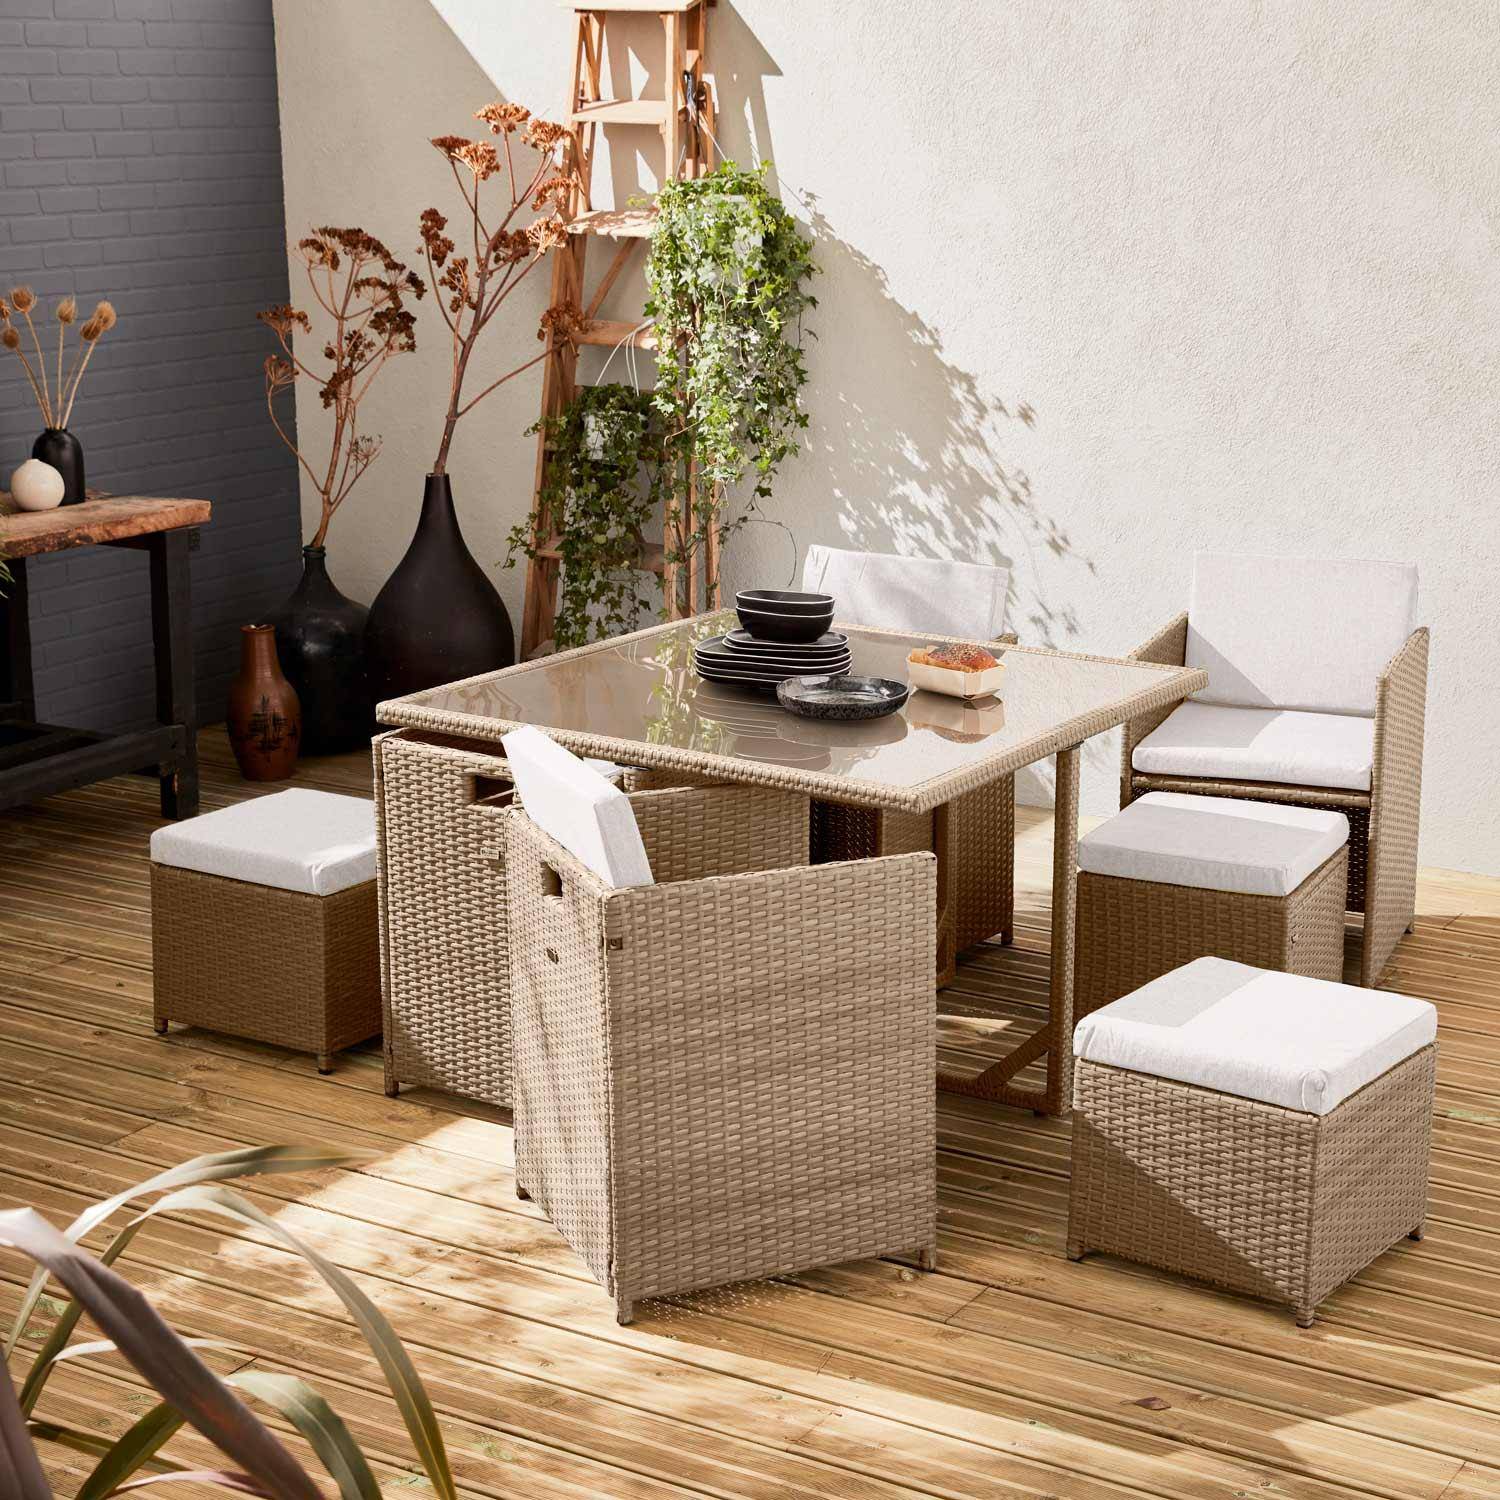 4 to 8-seater rattan cube table set - table, 4 armchairs, 4 footstools - Vabo 8 - Natural rattan, Beige cushions,sweeek,Photo1